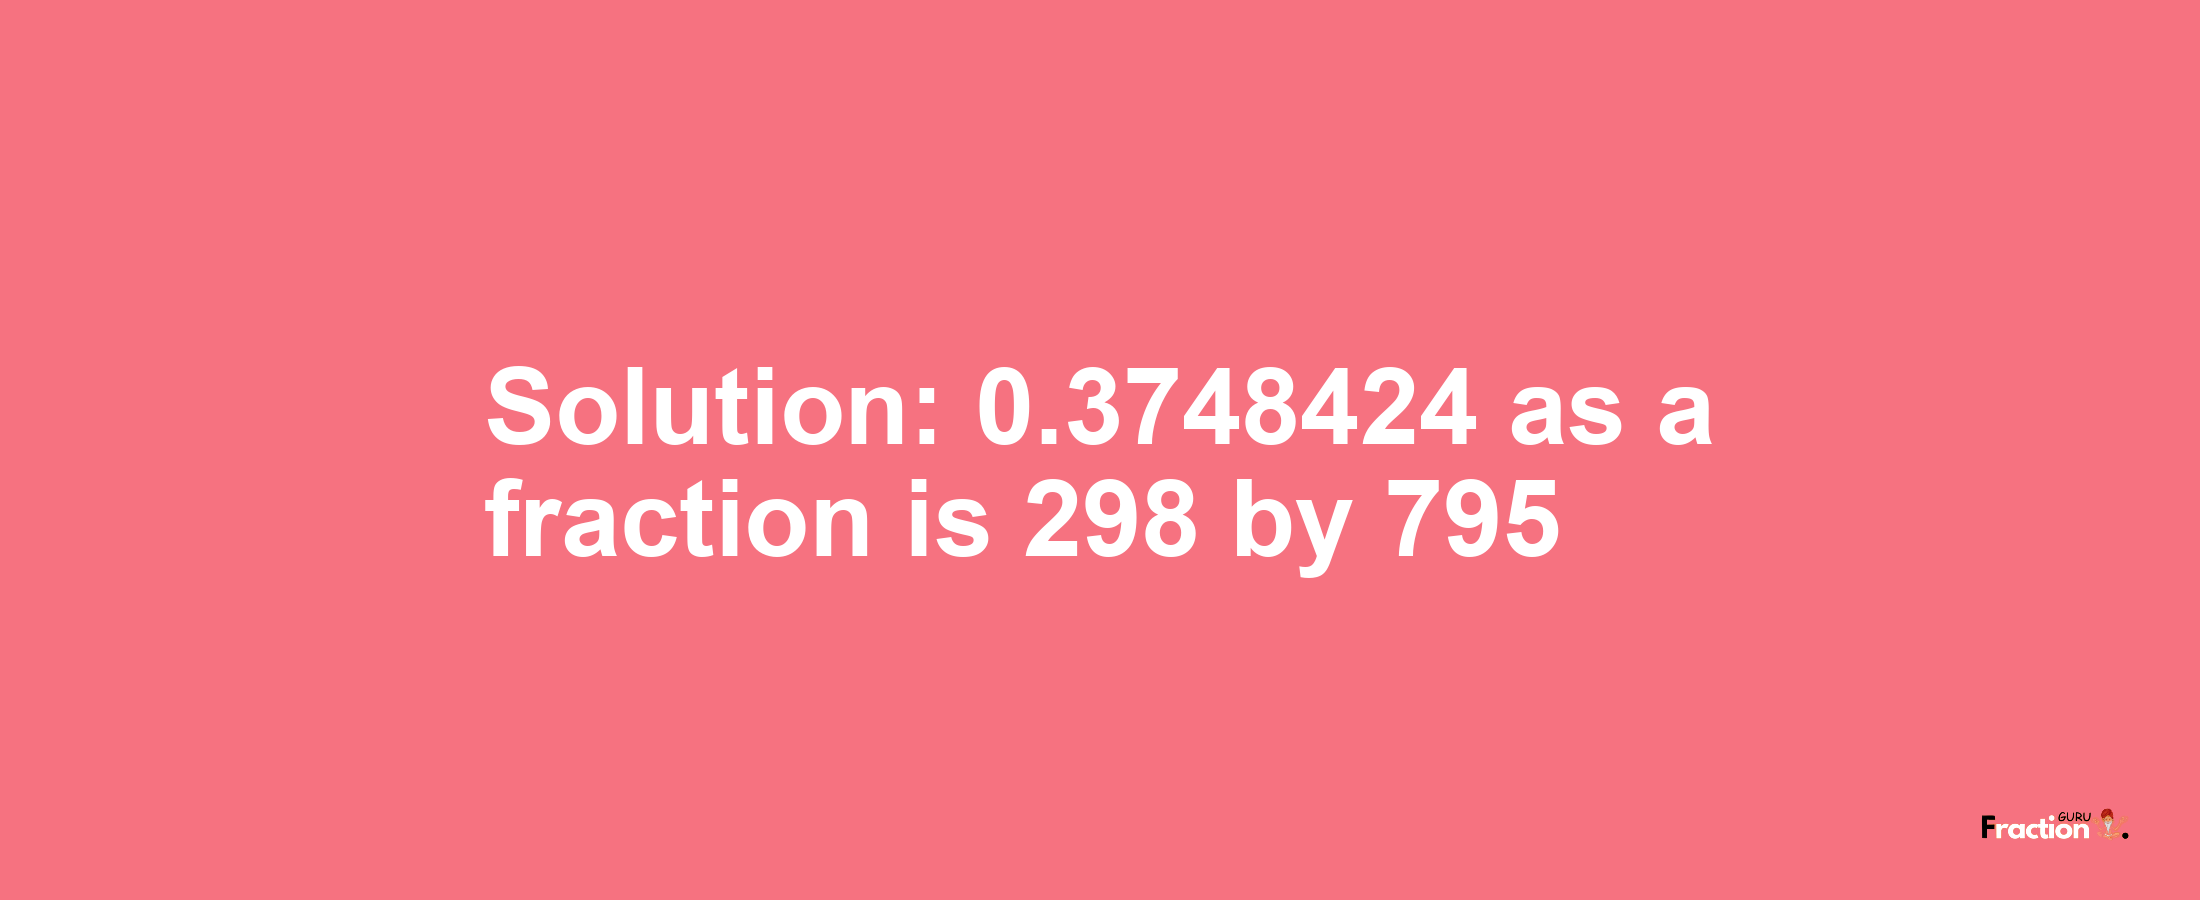 Solution:0.3748424 as a fraction is 298/795